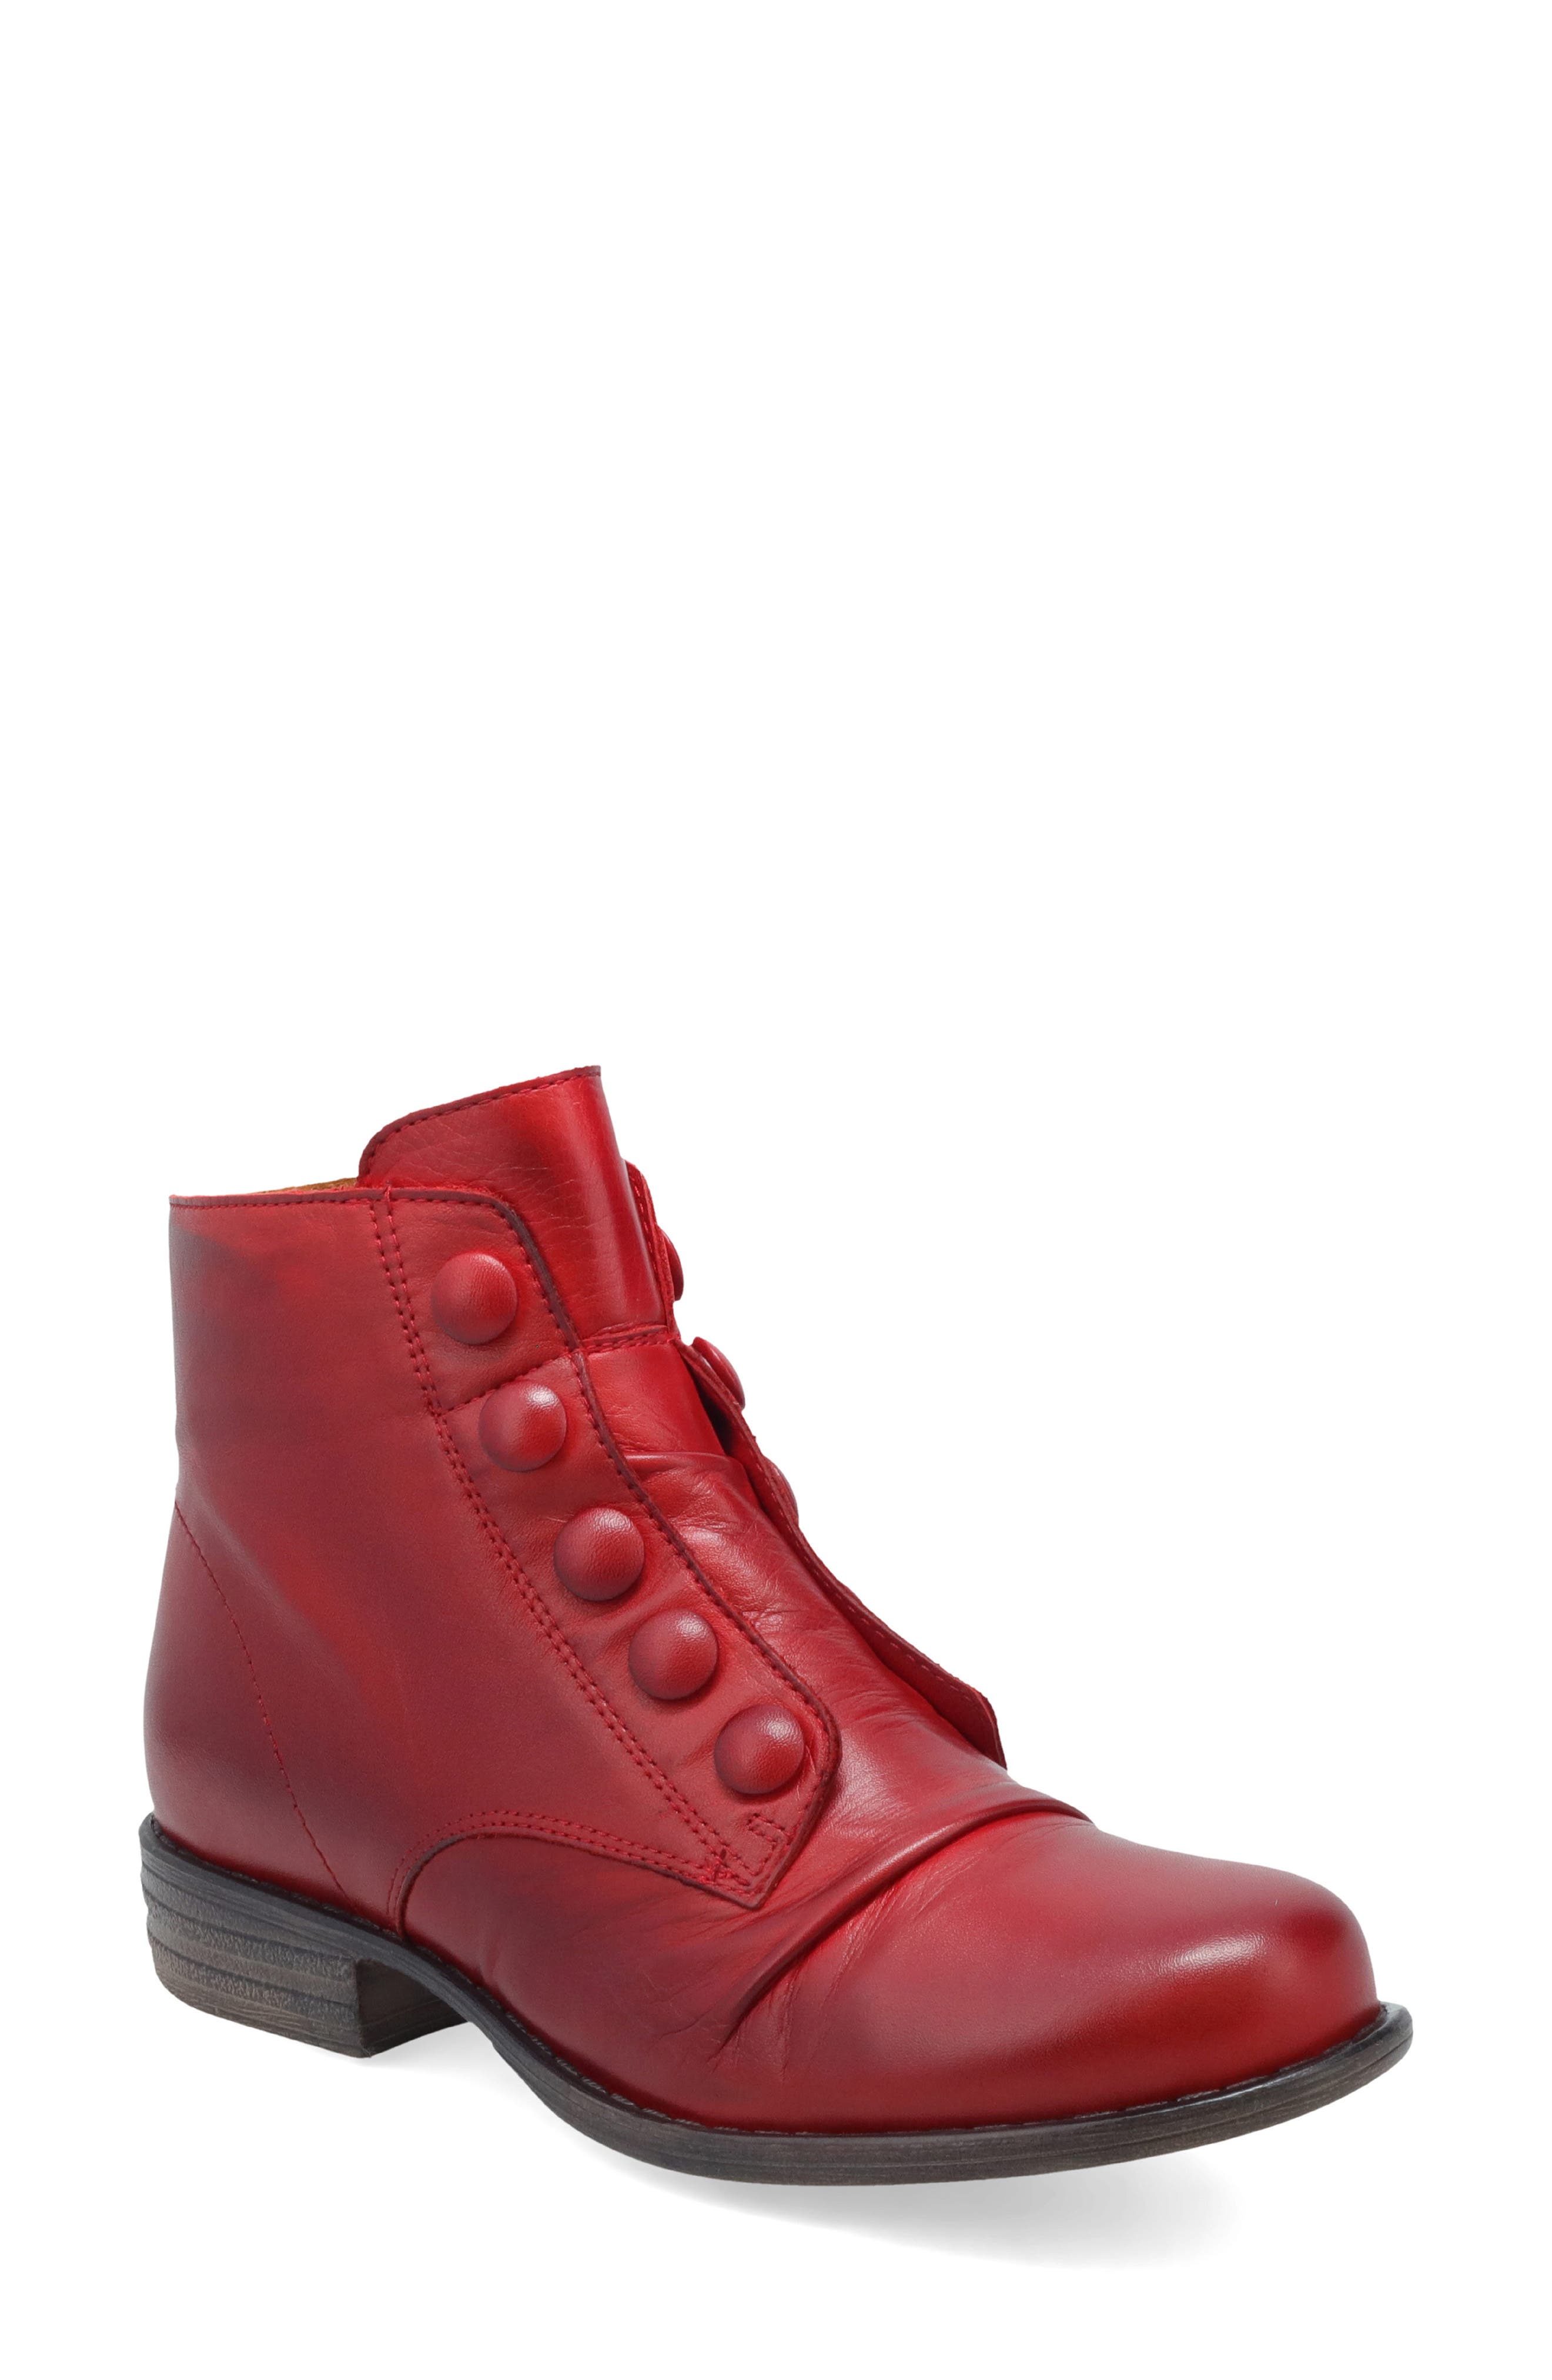 LADIES SHOES/FOOTWEAR Borelli April ankle boot red